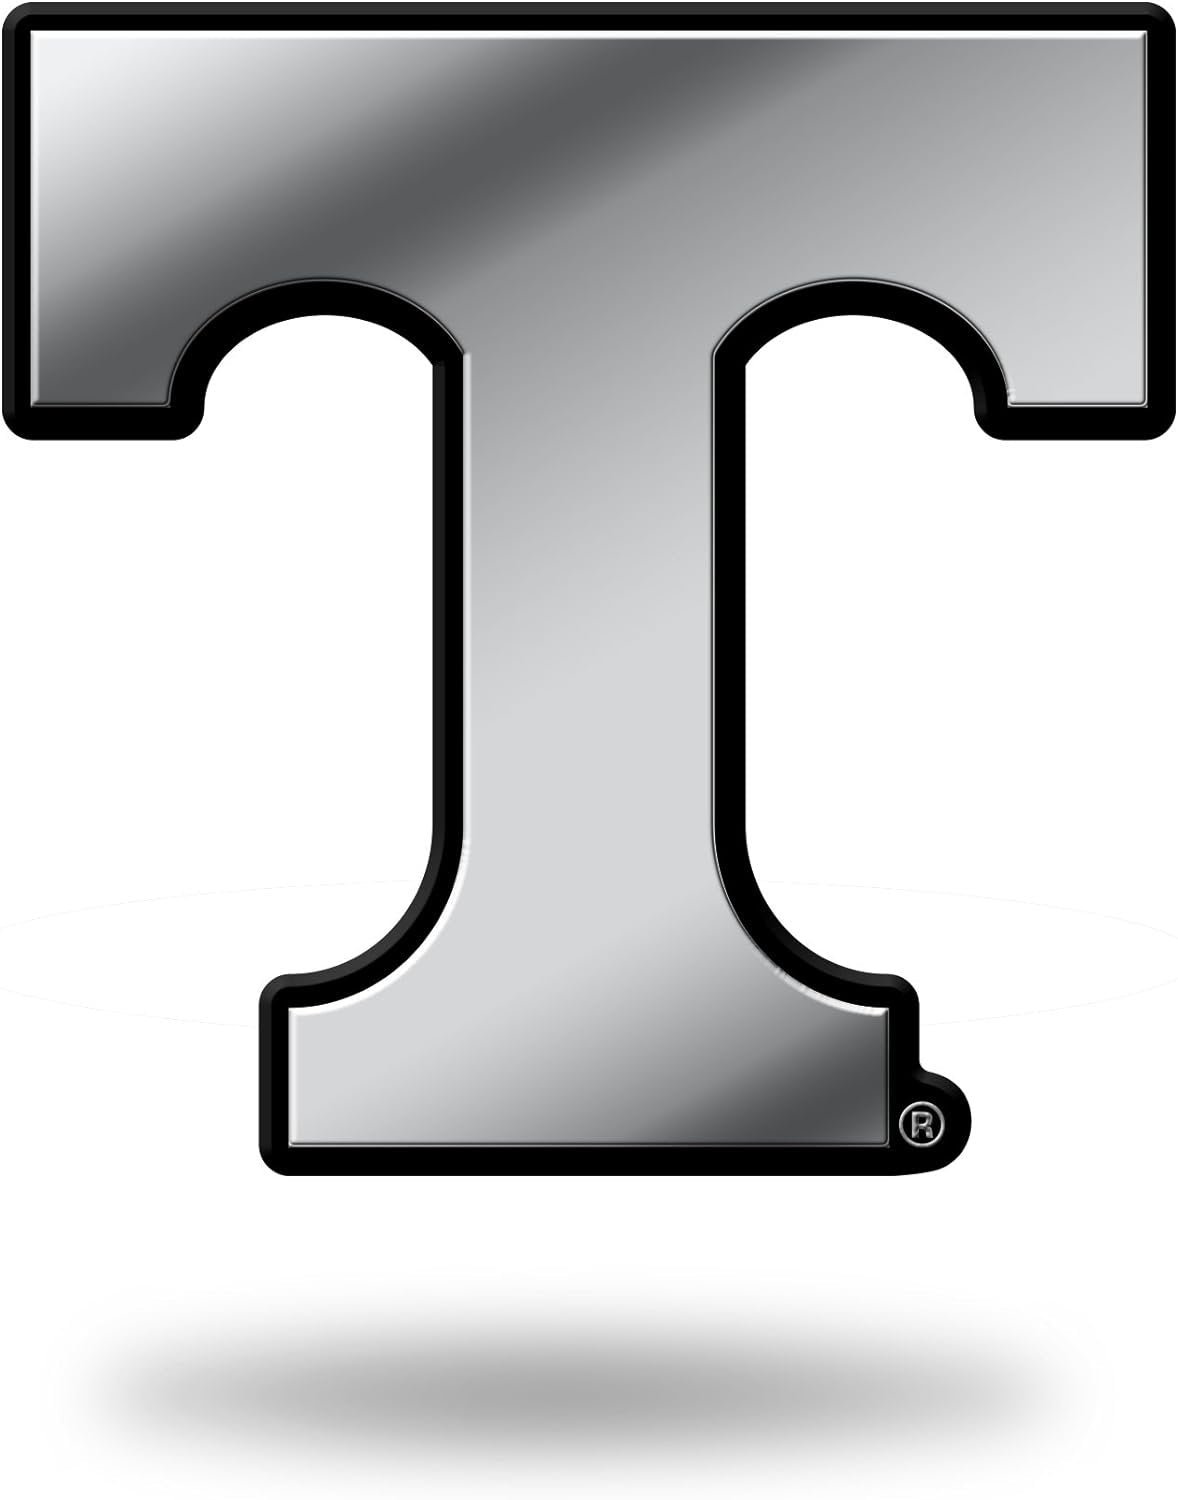 University of Tennessee Volunteers Auto Emblem, Silver Chrome Color, Raised Molded Plastic, 3.5 Inch, Adhesive Tape Backing